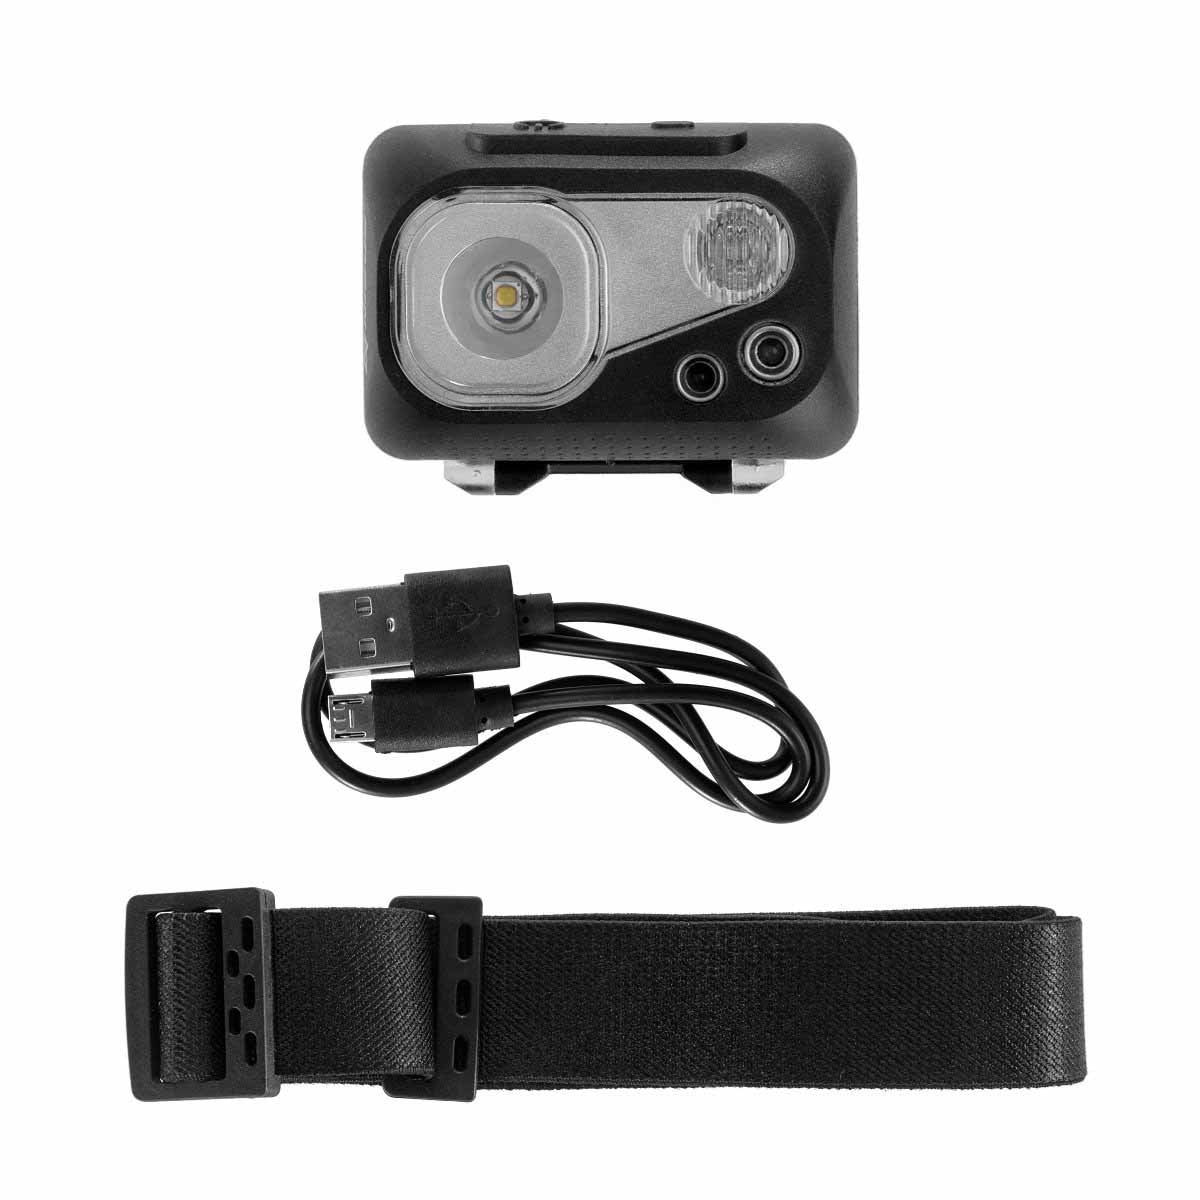 LED Rechargeable Portable Waterproof Headlamp consists of a flashlight, head band and a USB cable